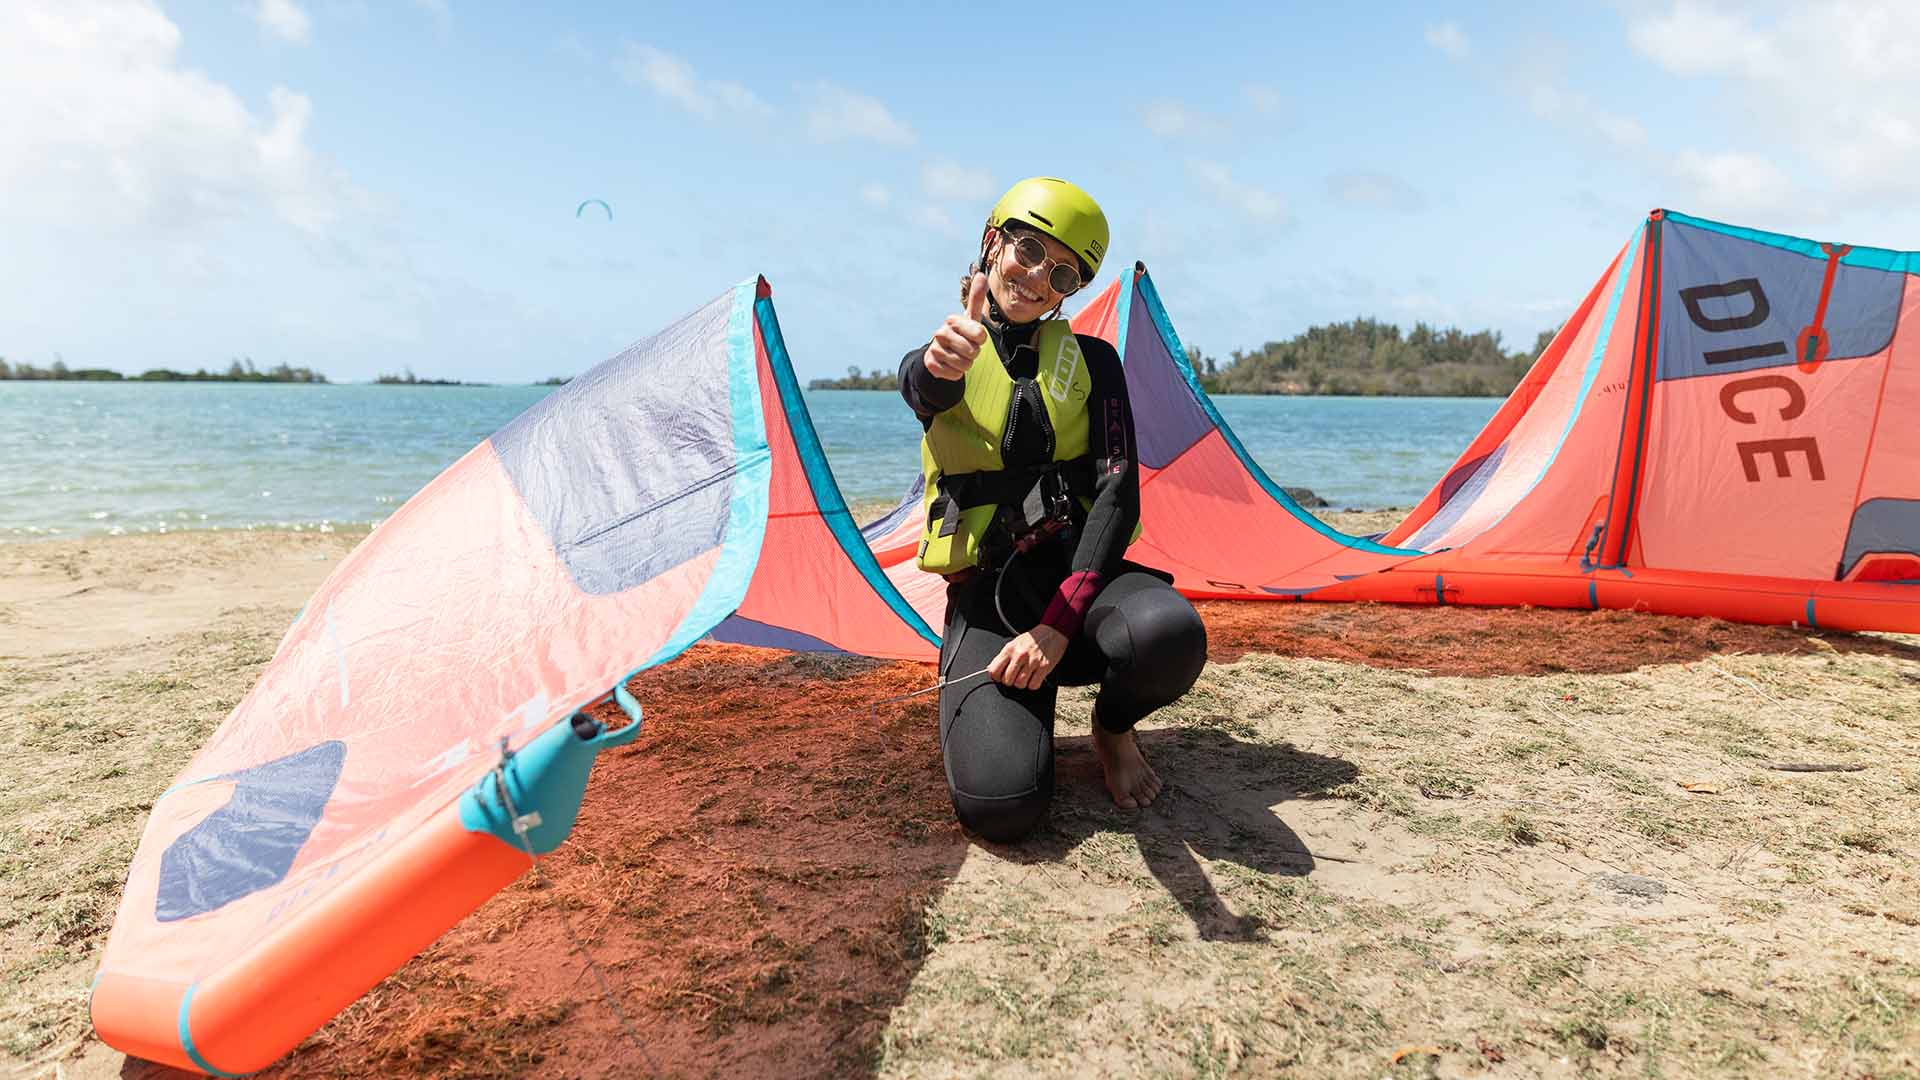 ion harness on the beach with pink, blue and grey colors